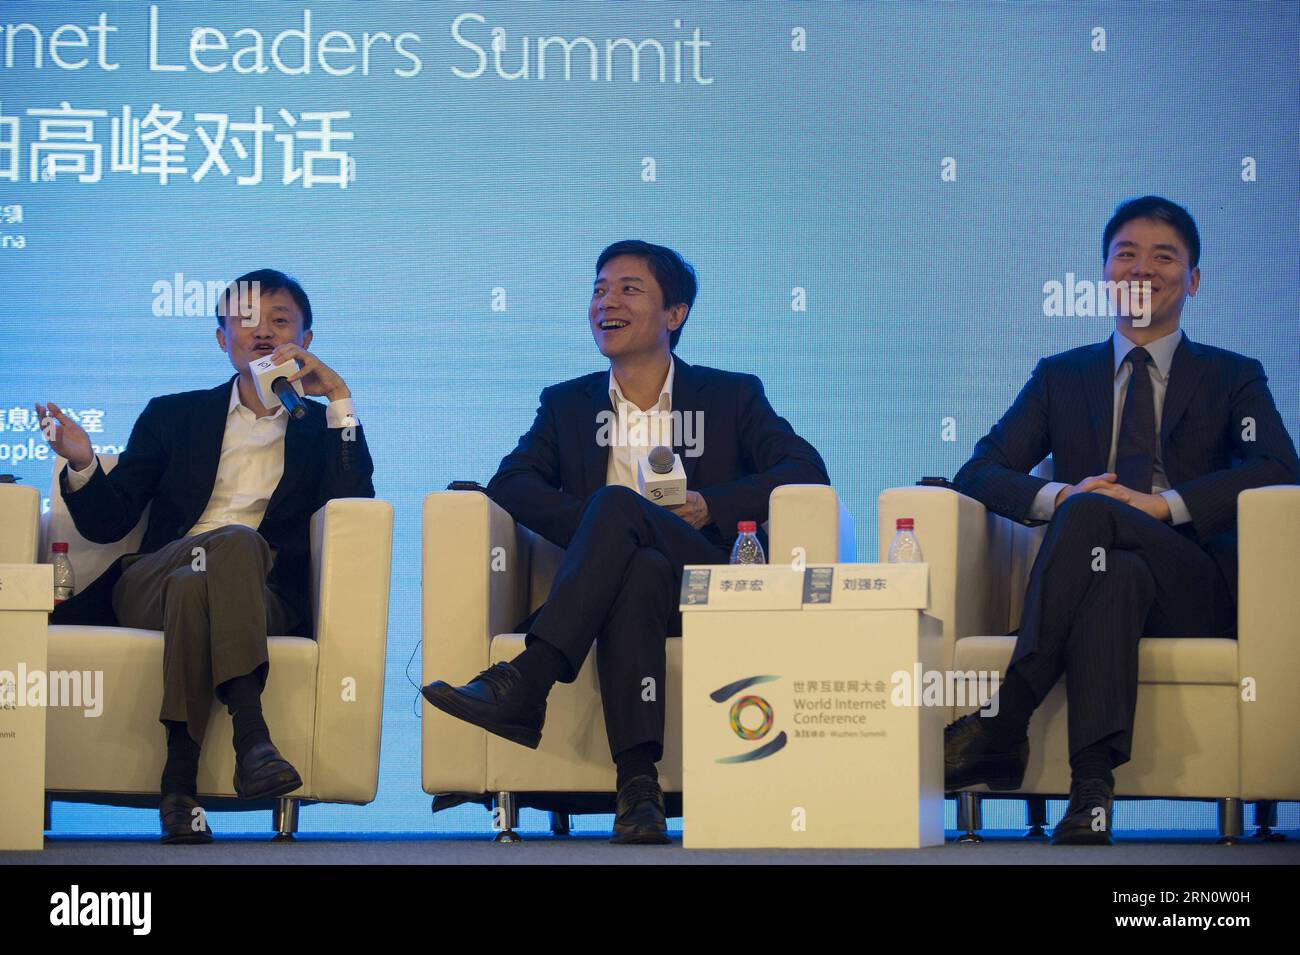 (141120) -- WUZHEN, Nov. 19, 2014 -- Ma Yun (L), founder and chairman of China s leading e-commerce company Alibaba Group, Co-founder, Chairman and CEO of Chinese search engine Baidu Li Yanhong (C), and Liu Qiangdong (R), CEO of e-commerce company JD.com, attend the Chinese and Foreign Internet Leaders Summit during the World Internet Conference in Wuzhen, east China s Zhejiang Province, Nov. 19, 2014. Representatives from nearly 100 countries and regions took part in the three-day 2014 World Internet Conference that kicked off Wednesday in Wuzhen. ) (ry) CHINA-ZHEJIANG-WUZHEN-WORLD INTERNET C Stock Photo